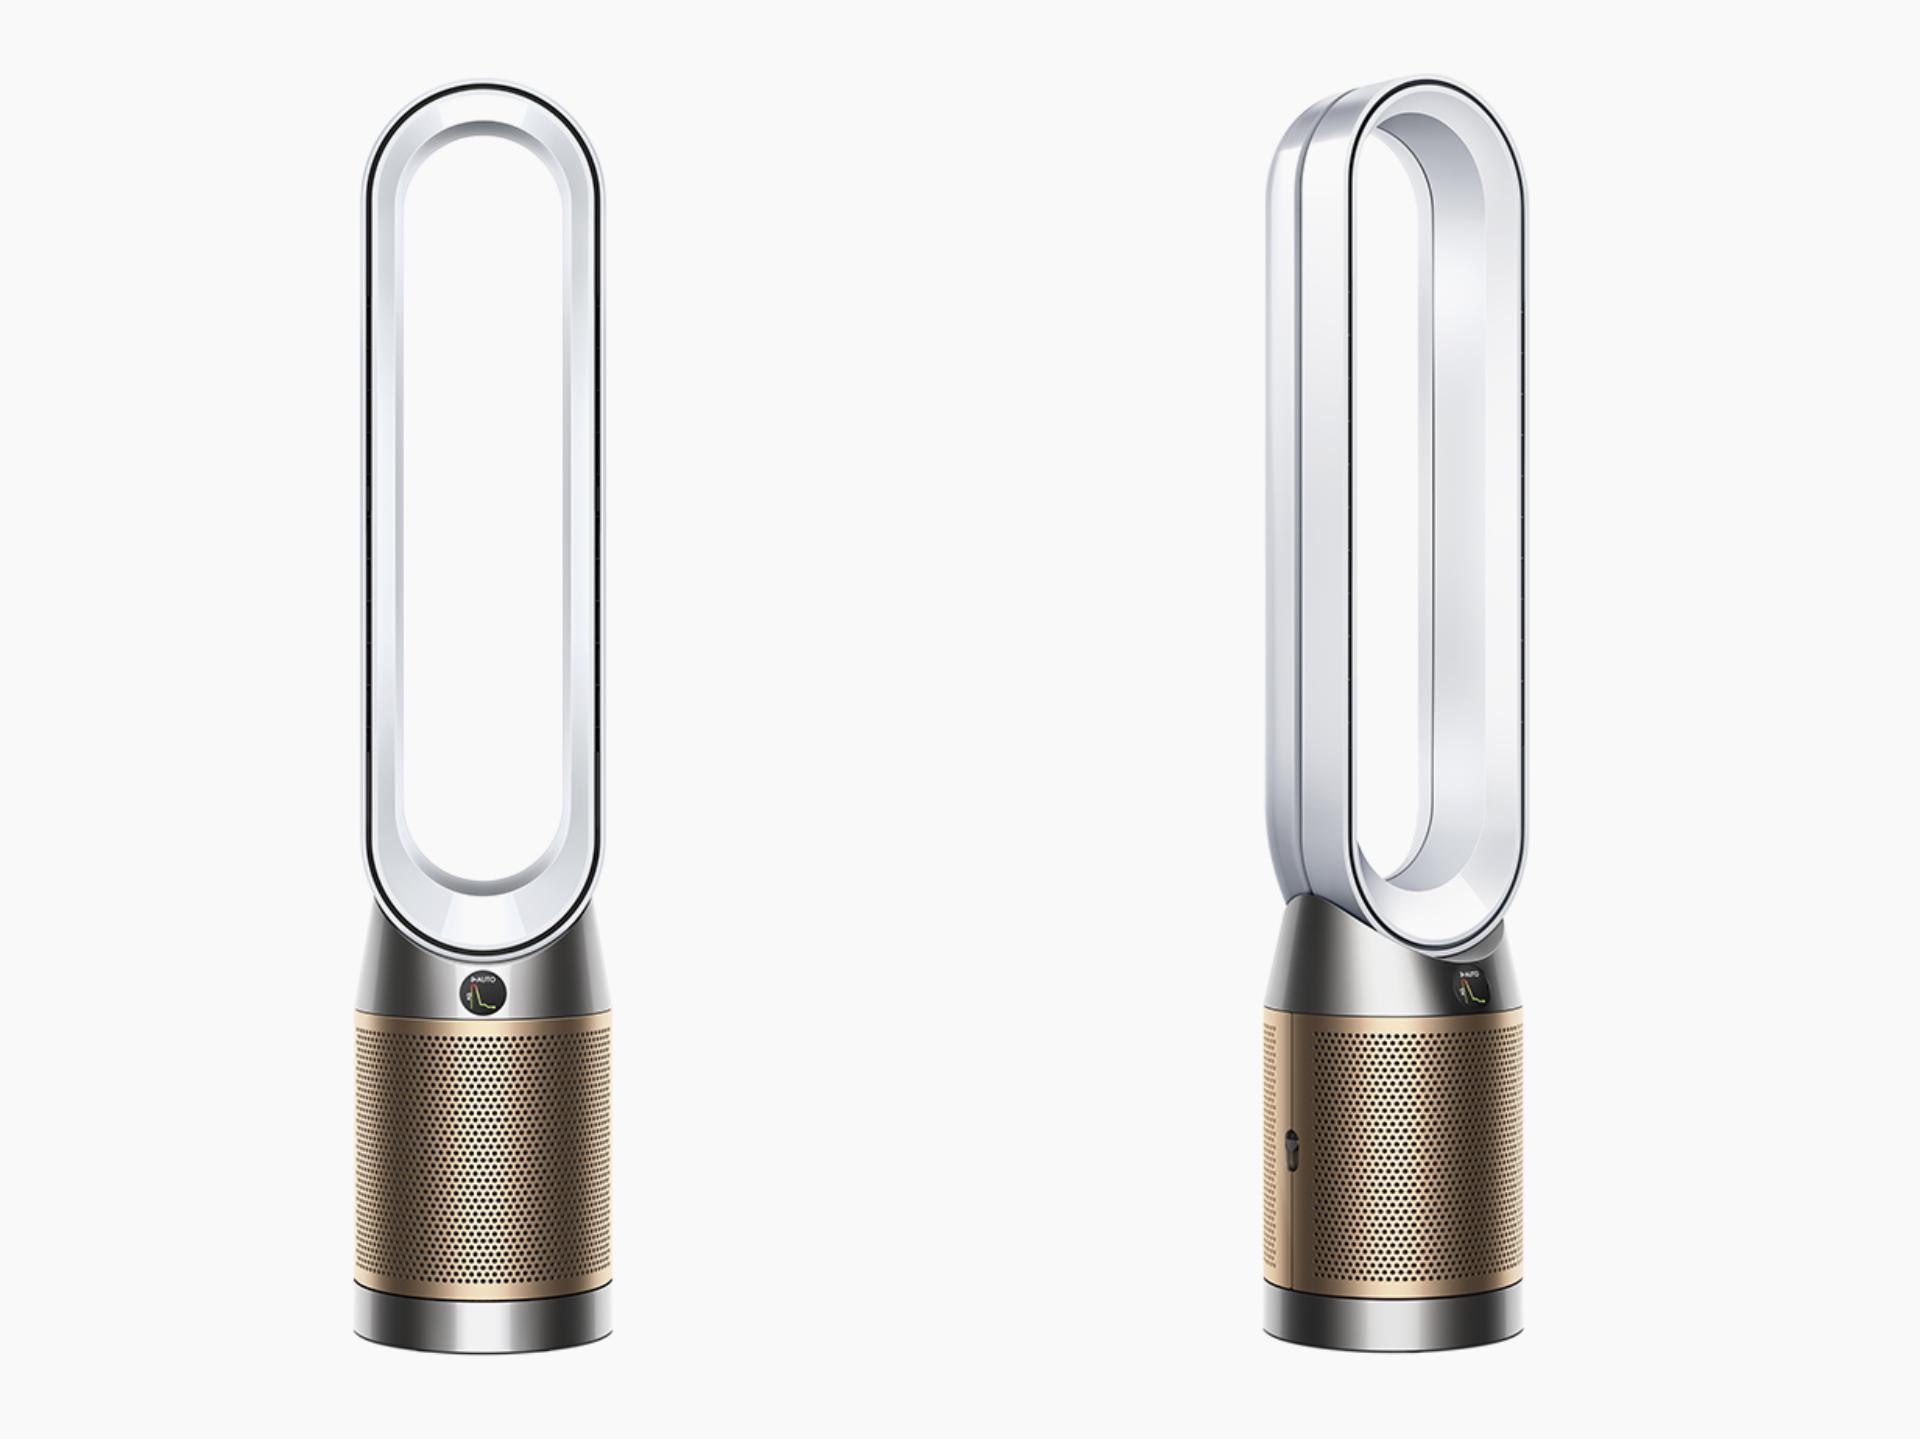 Dyson Purifier Cool Formaldehyde front and side views